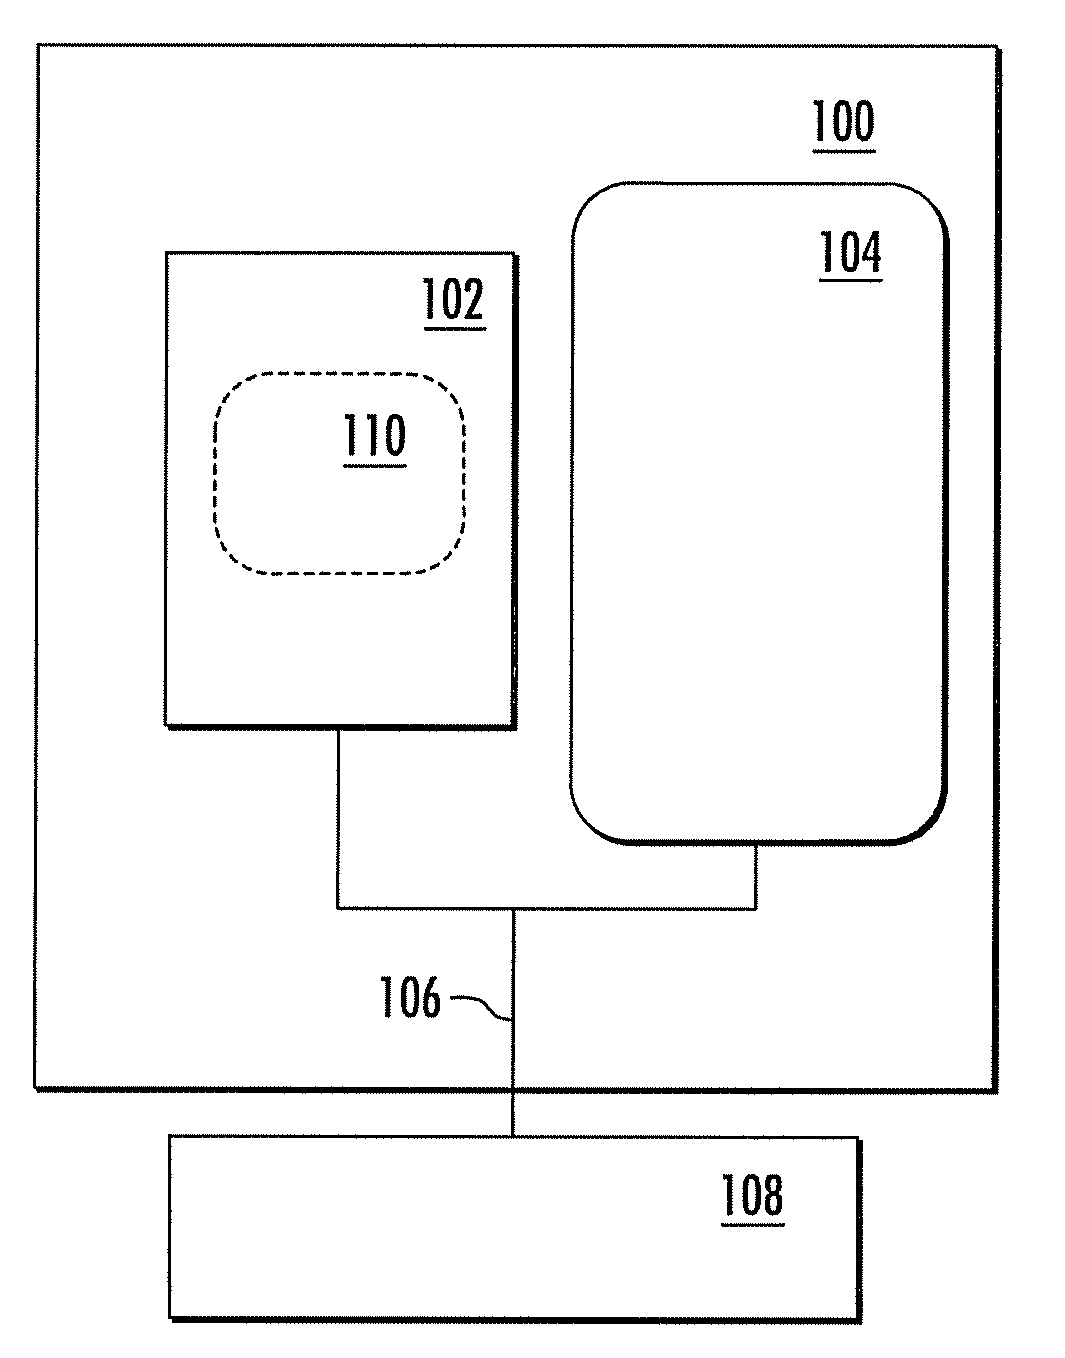 System and methods for sequencing learning objects based upon query and user relevancy